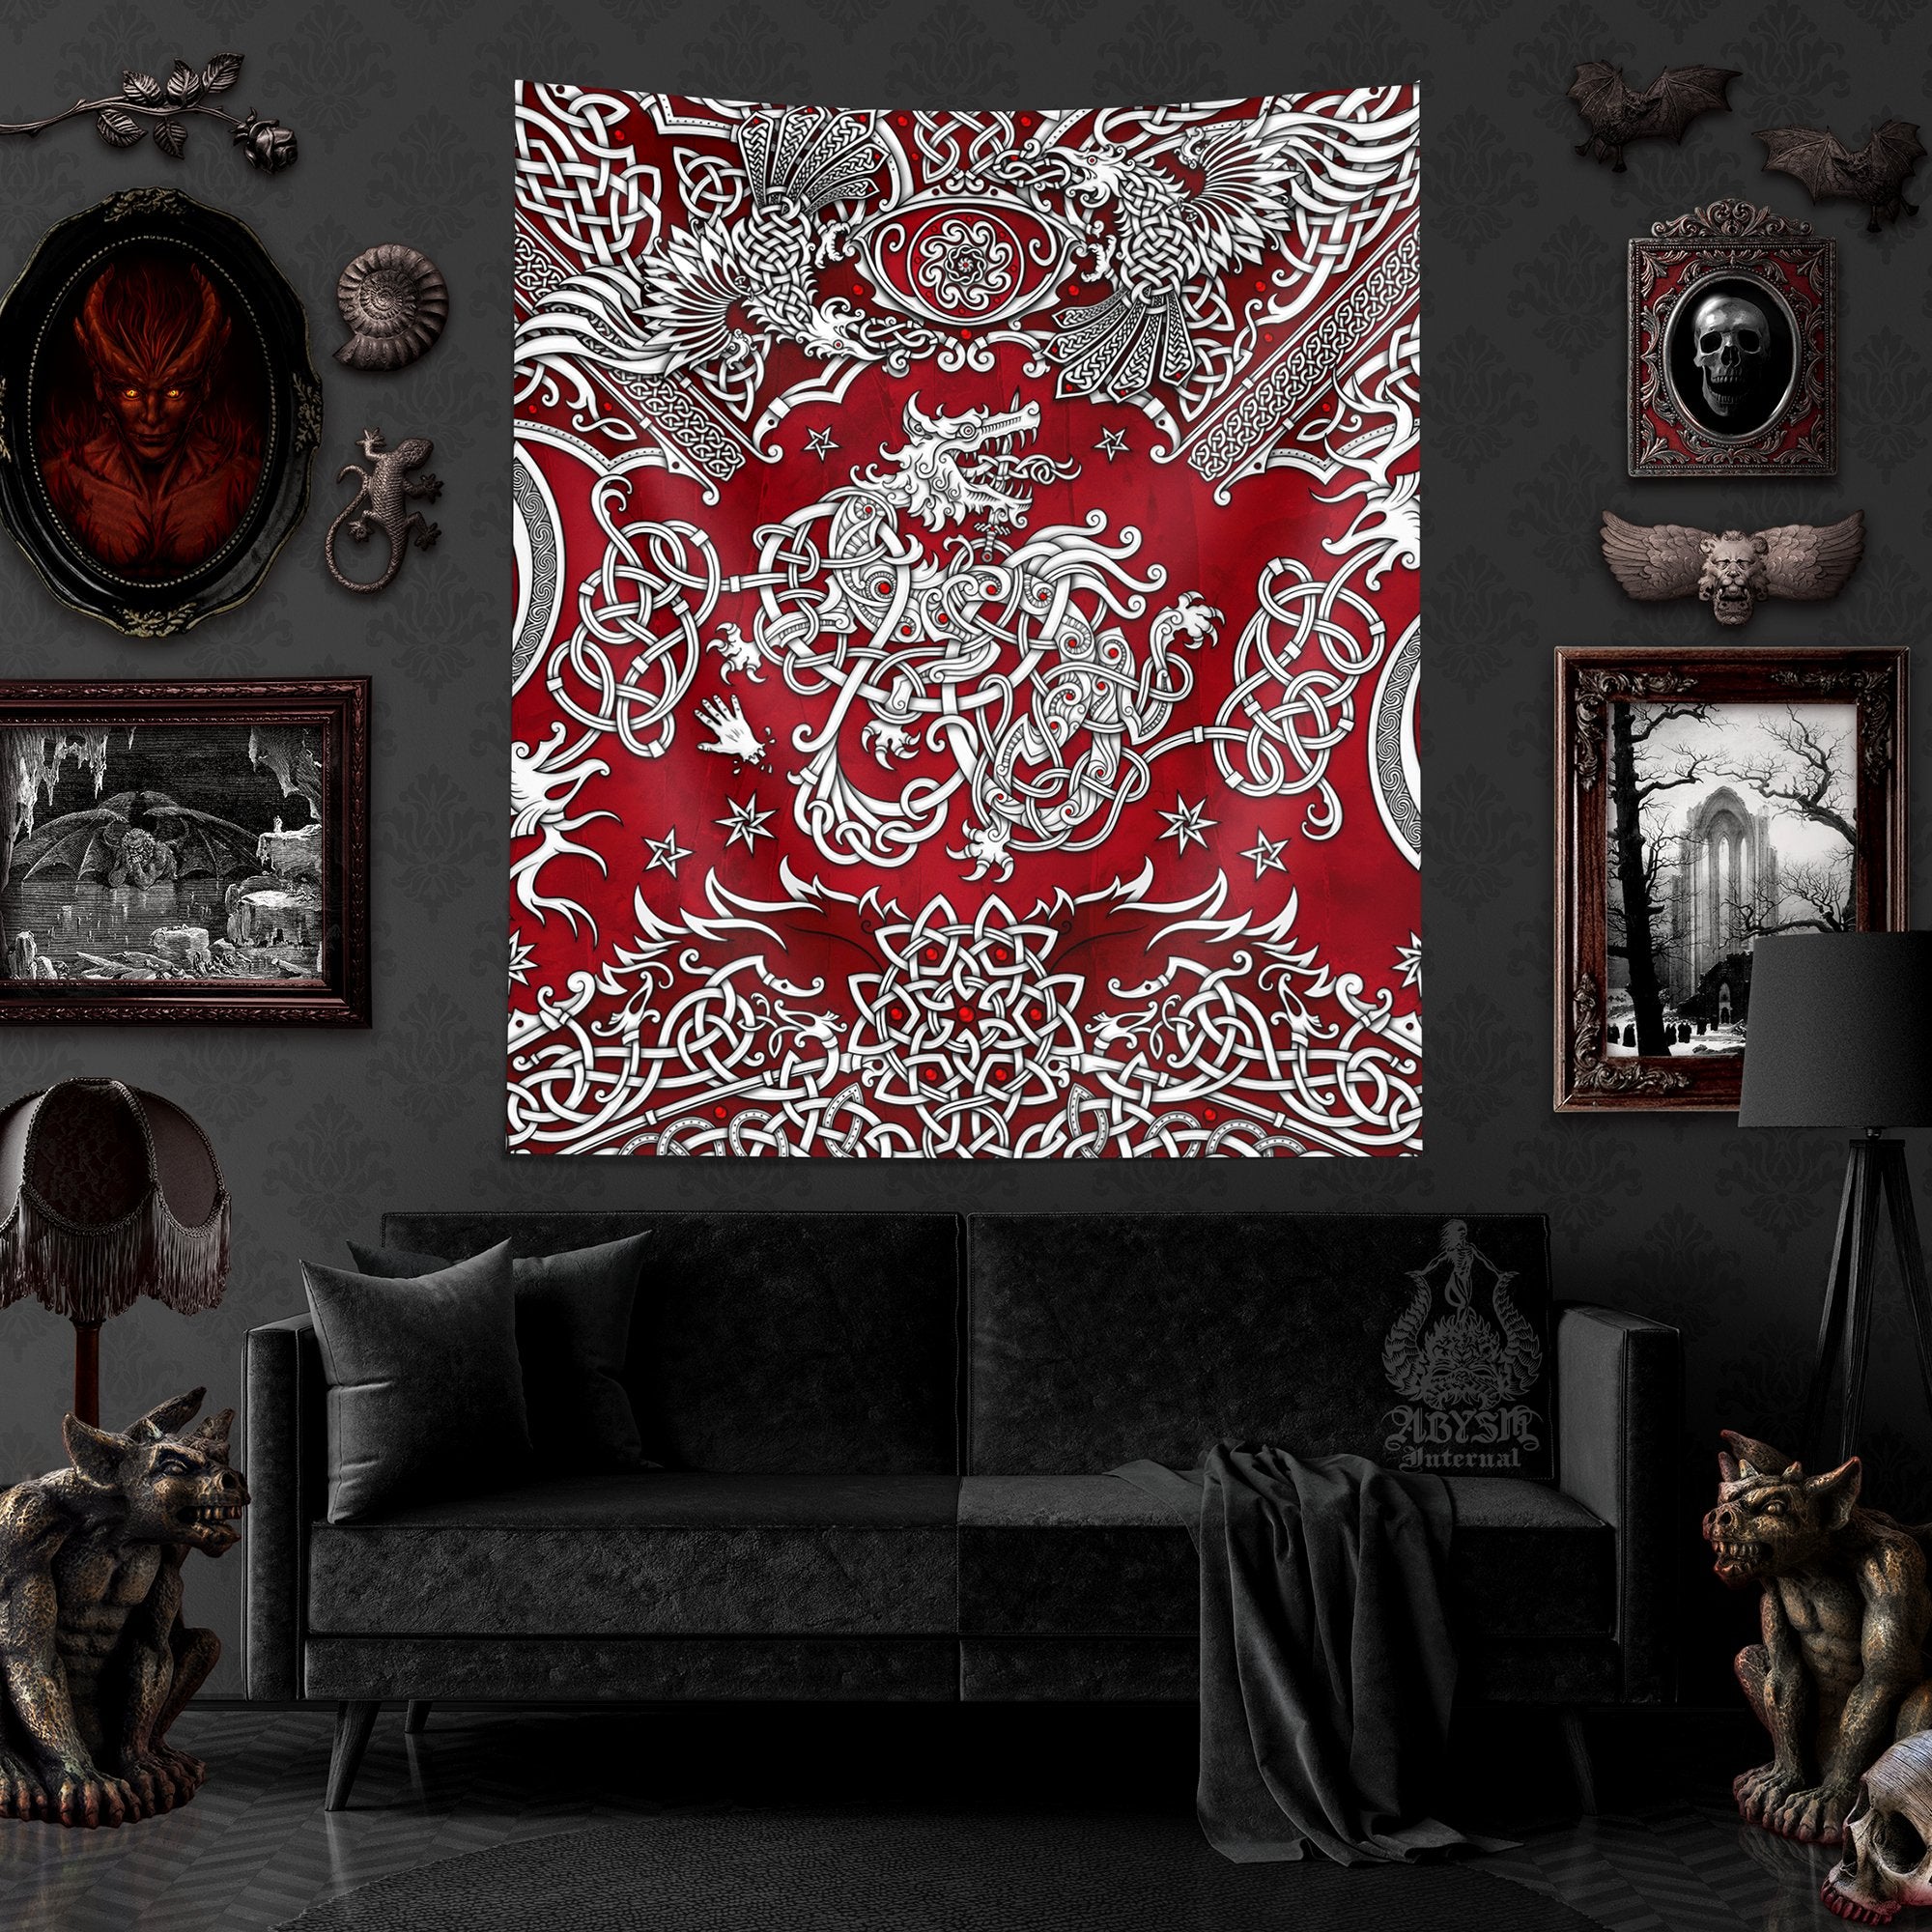 Fenrir Tapestry, Norse Wolf Wall Hanging, Nordic Mythology Art, Viking Home Decor, Vertical Print - White and 3 Colors - Abysm Internal